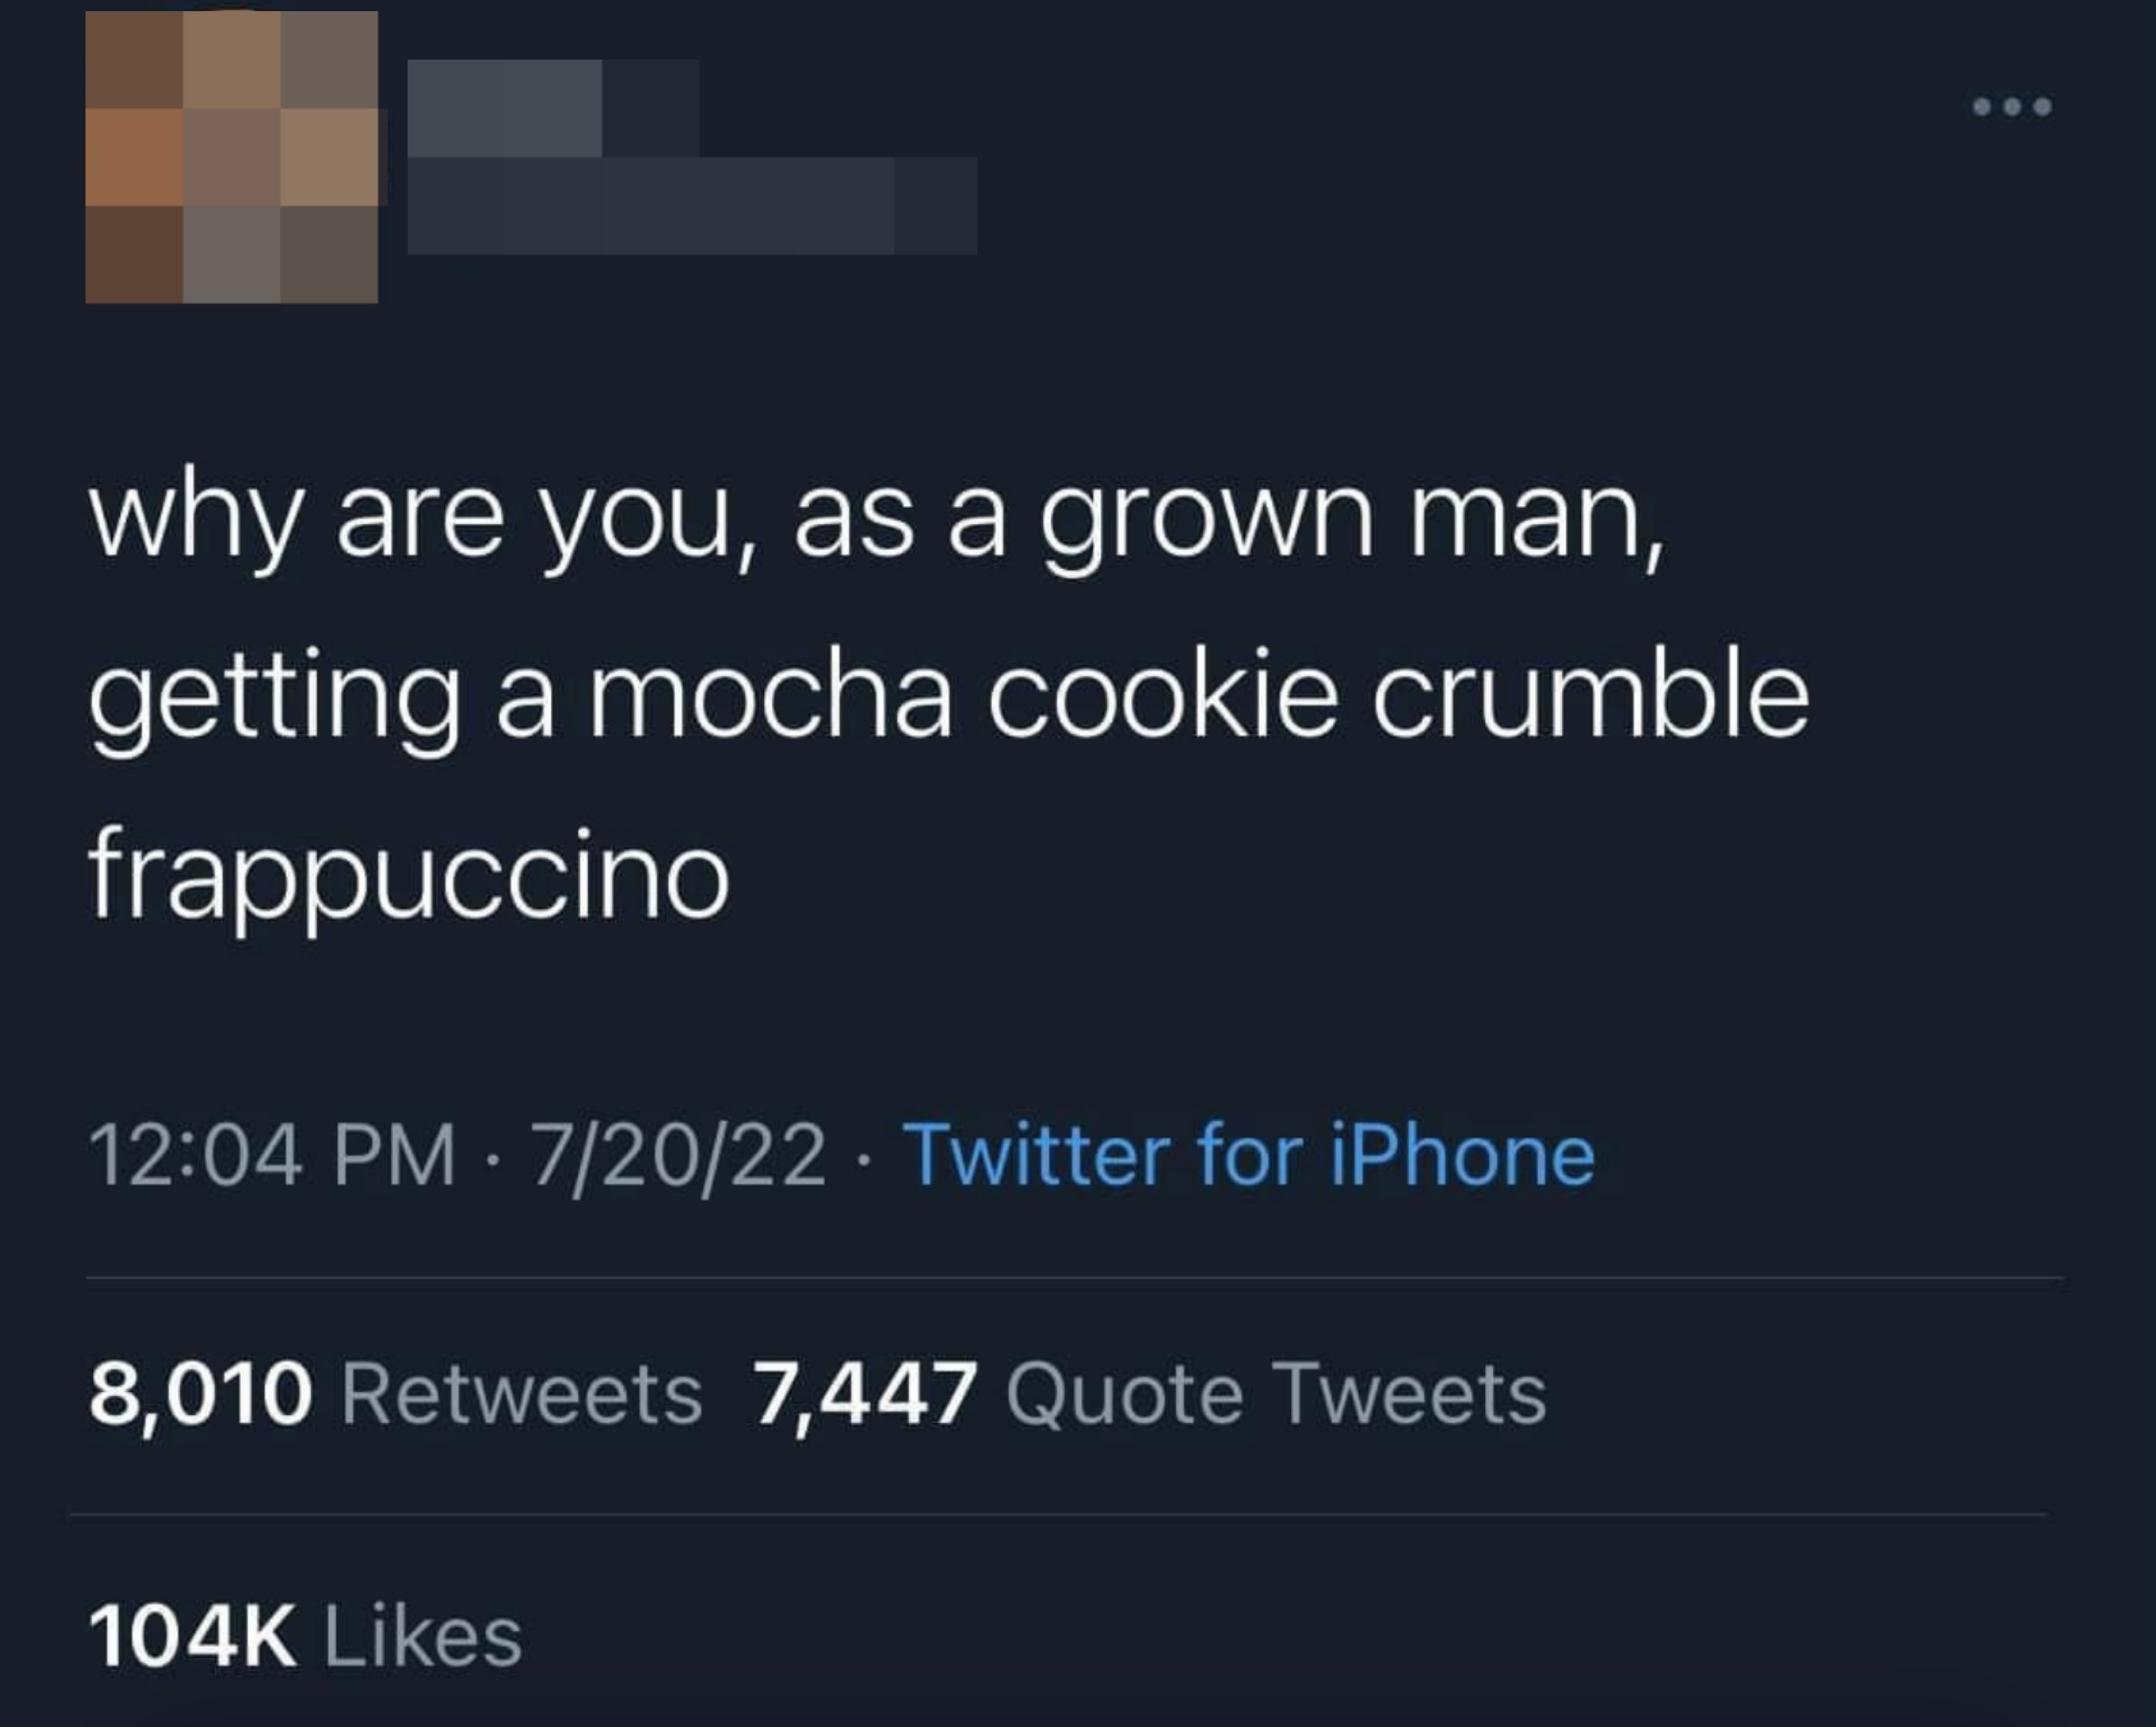 Tweet saying, &quot;why are you, as a grown man, getting a mocha cookie crumble frappuccino&quot;